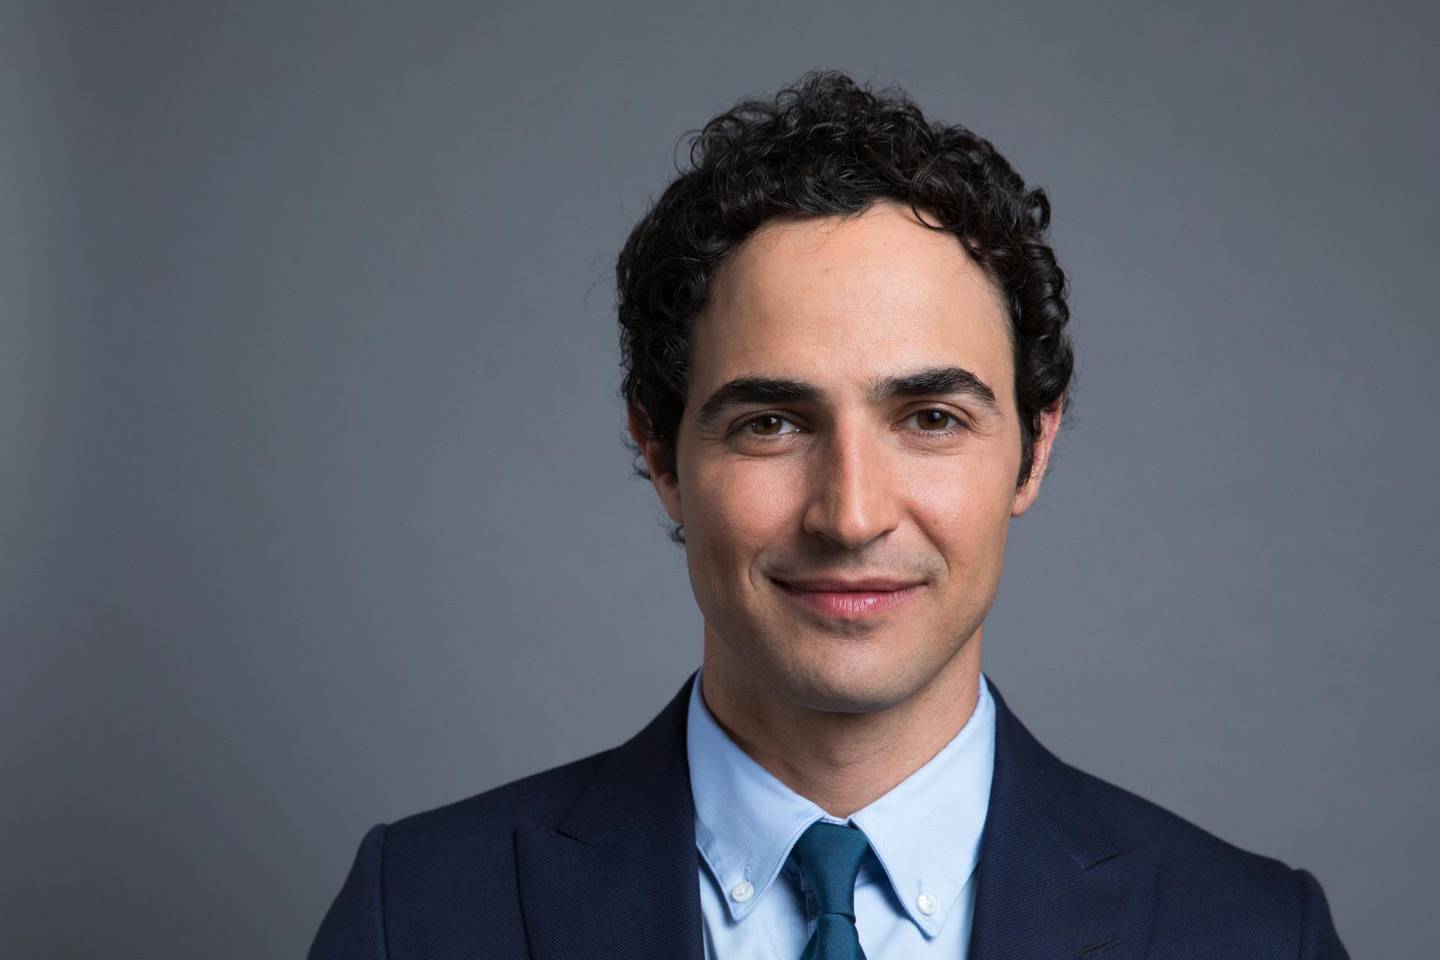 FILE - In this July 31, 2017 file photo, Zac Posen poses for a photo to promote his new documentary, "House of Z" in New York. Posen is shutting down his namesake label. Posen, 39, said he was â€œdeeply saddened that the journey of nearly 20 years has come to an end.â€ He launched his label in 2001. (Photo by Amy Sussman/Invision/AP, File)